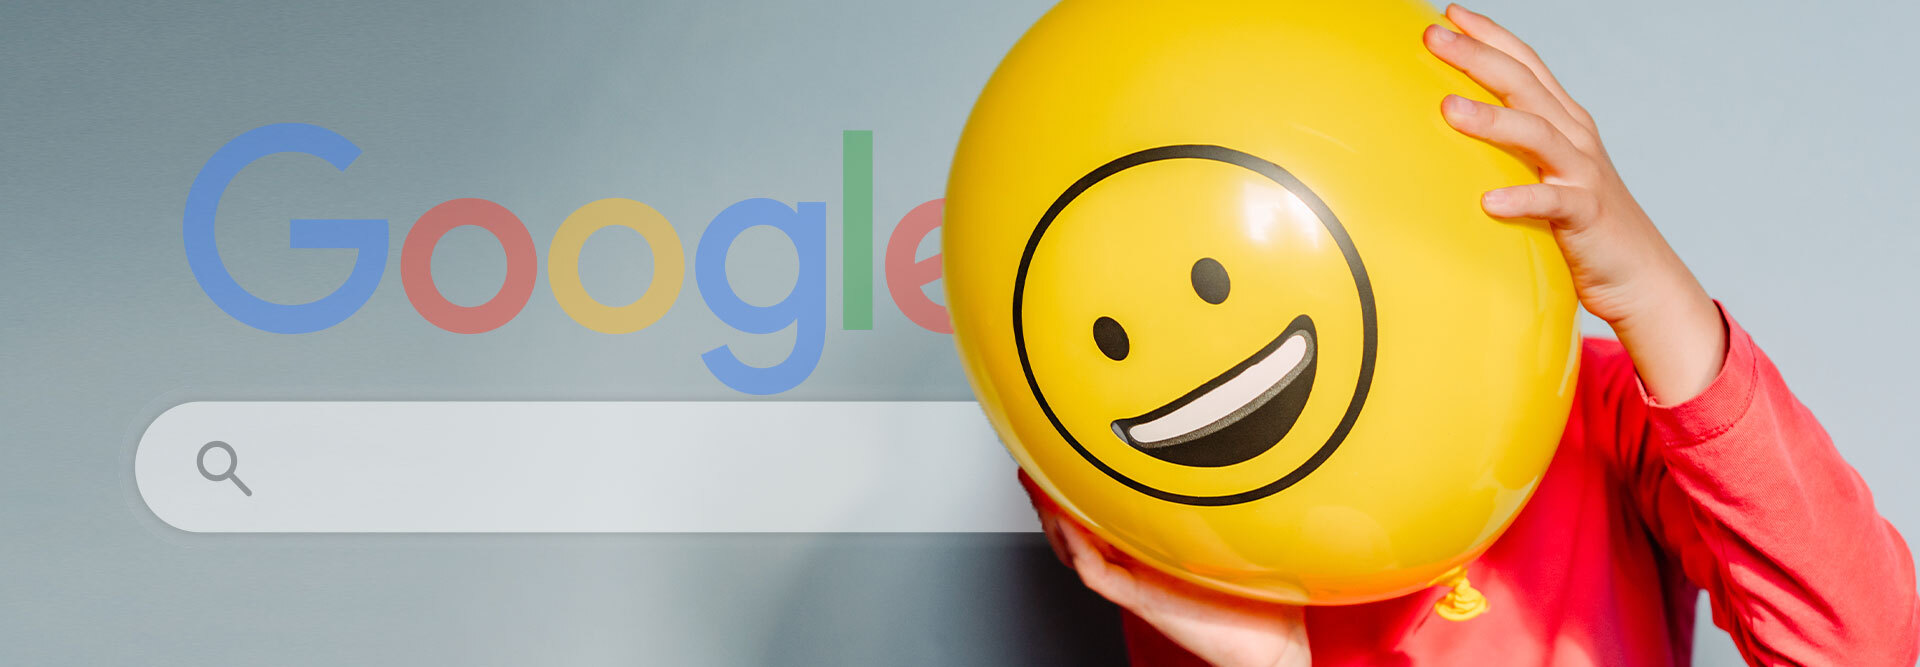 50+ Cool & Fun Google Tricks List to Keep You Entertained